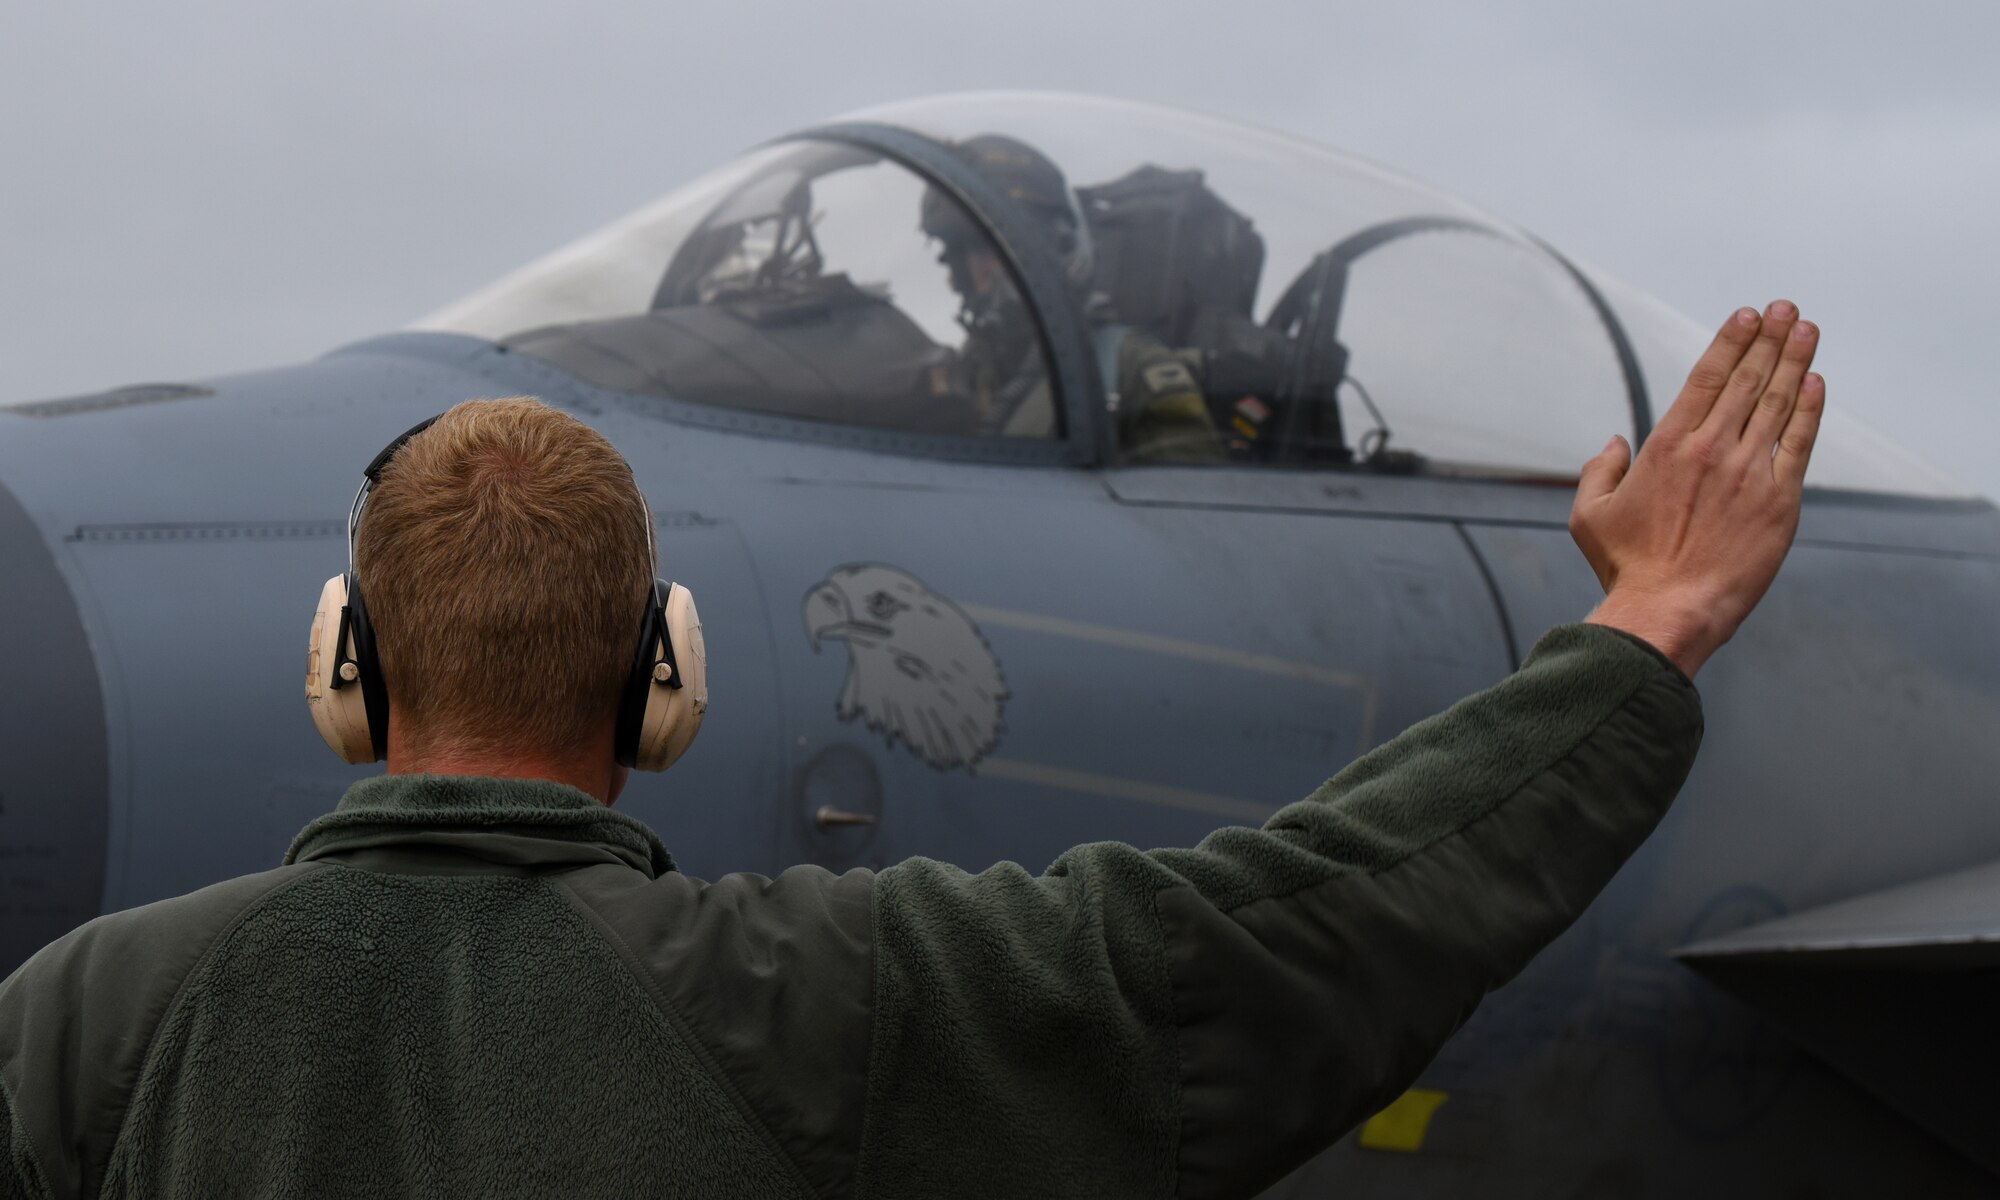 An Airman assigned to the 748th Aircraft Maintenance Squadron marshals an F-15C Eagle for departure at Keflavik Air Base, Iceland, Aug. 2, 2018, in support of NATO’s Icelandic Air Surveillance mission. During IAS, the 748th AMXS Airmen are responsible for maintaining the four mission critical F-15s as well as 10 additional jets designated for training. (U.S. Air Force photo/Staff Sgt. Alex Fox Echols III) (U.S. Air Force photo/Staff Sgt. Alex Fox Echols III)